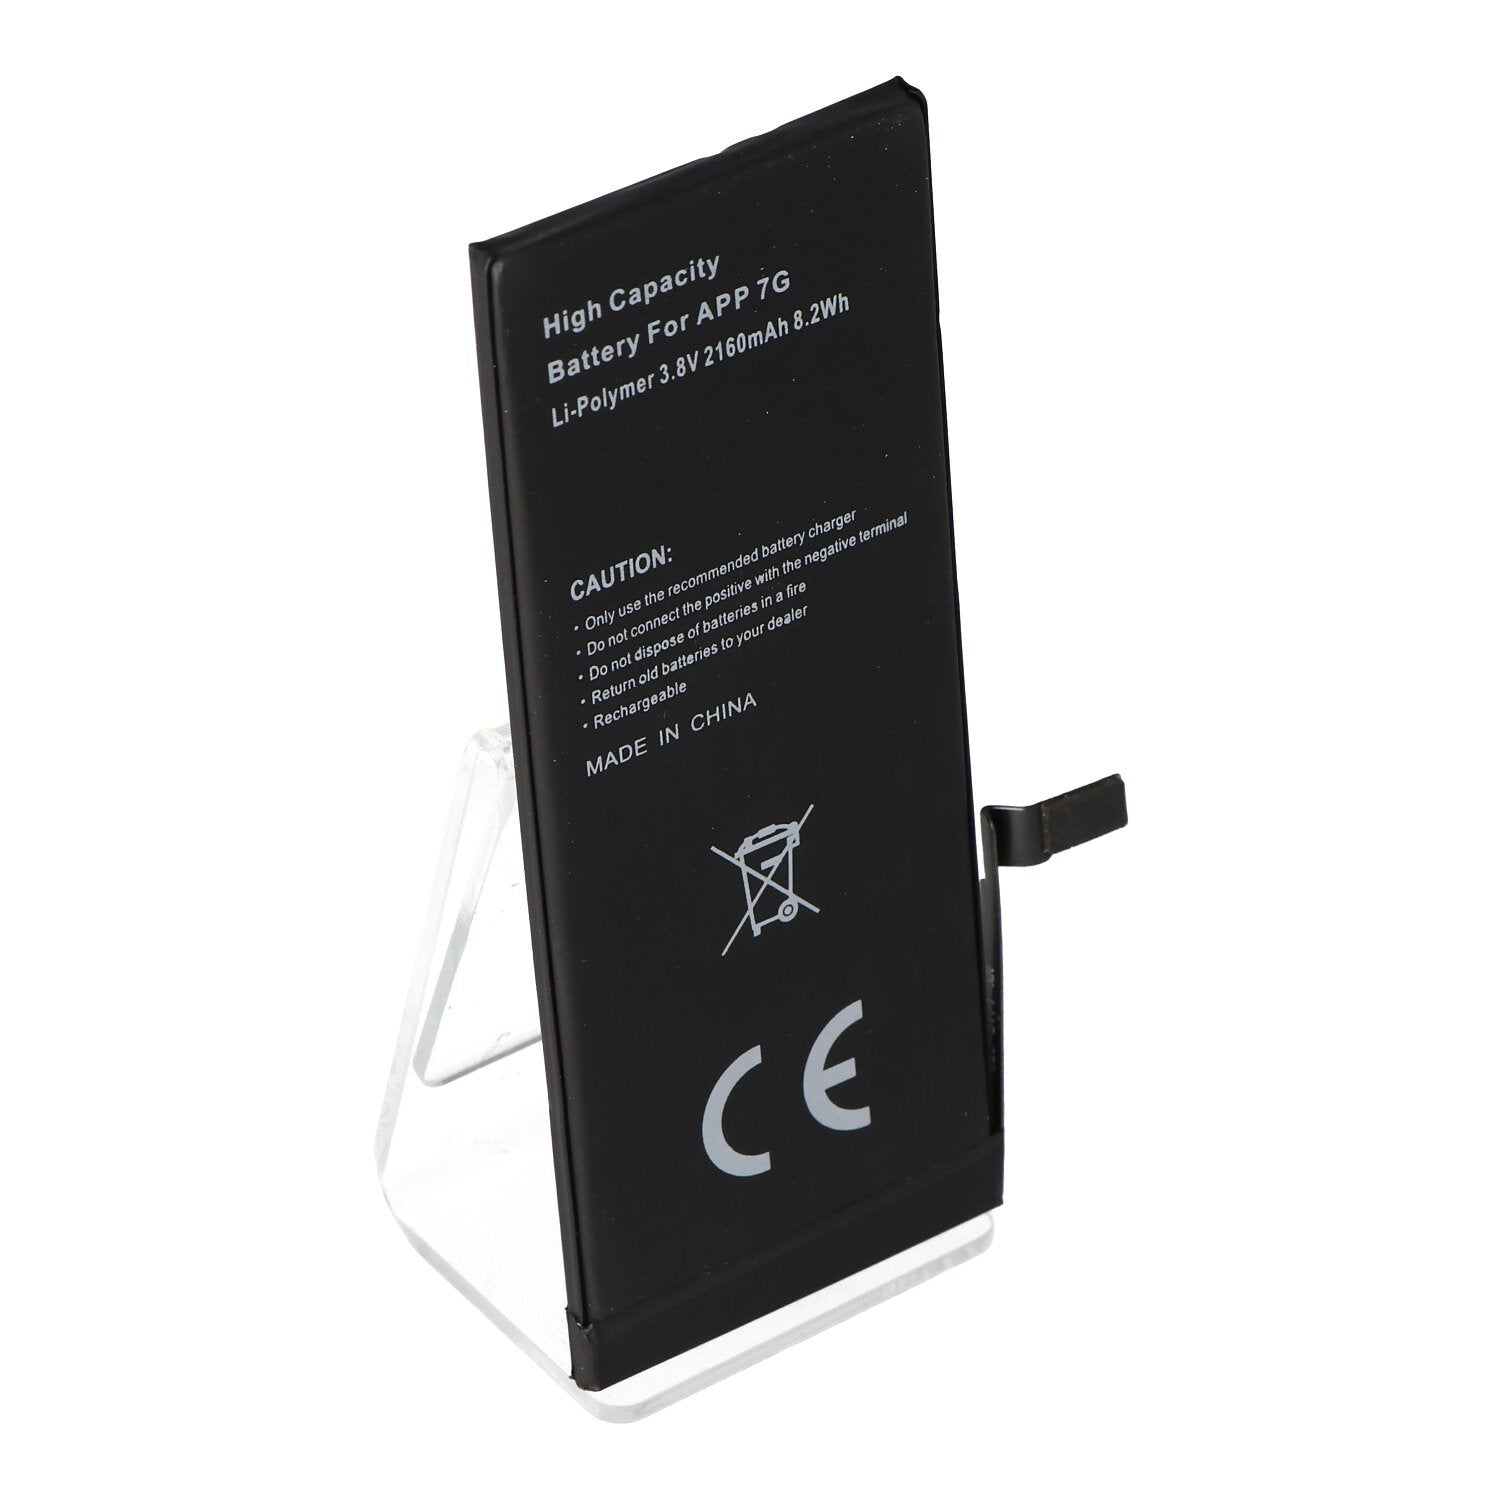 2160mAh battery suitable for the Apple iPhone 7 battery 616-00255, 616-00258, A1660, A1778, A1779, A